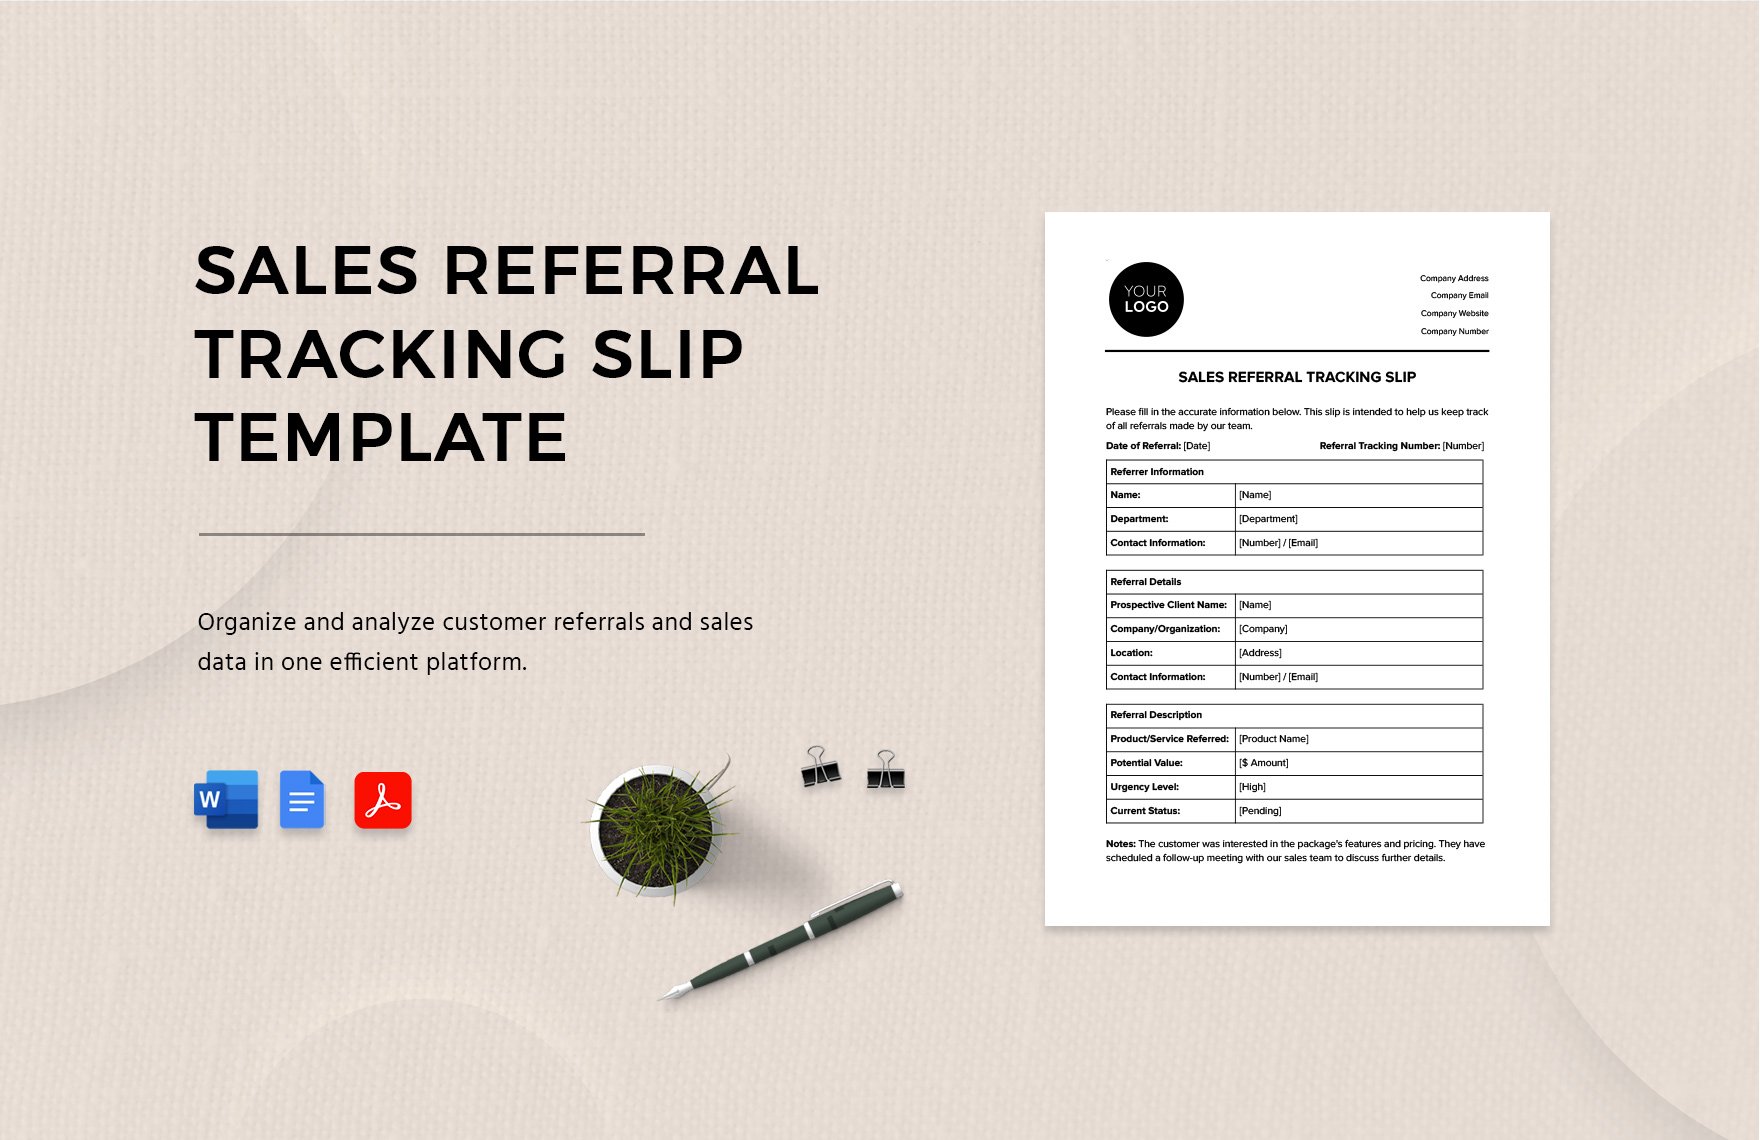 Sales Referral Tracking Slip Template